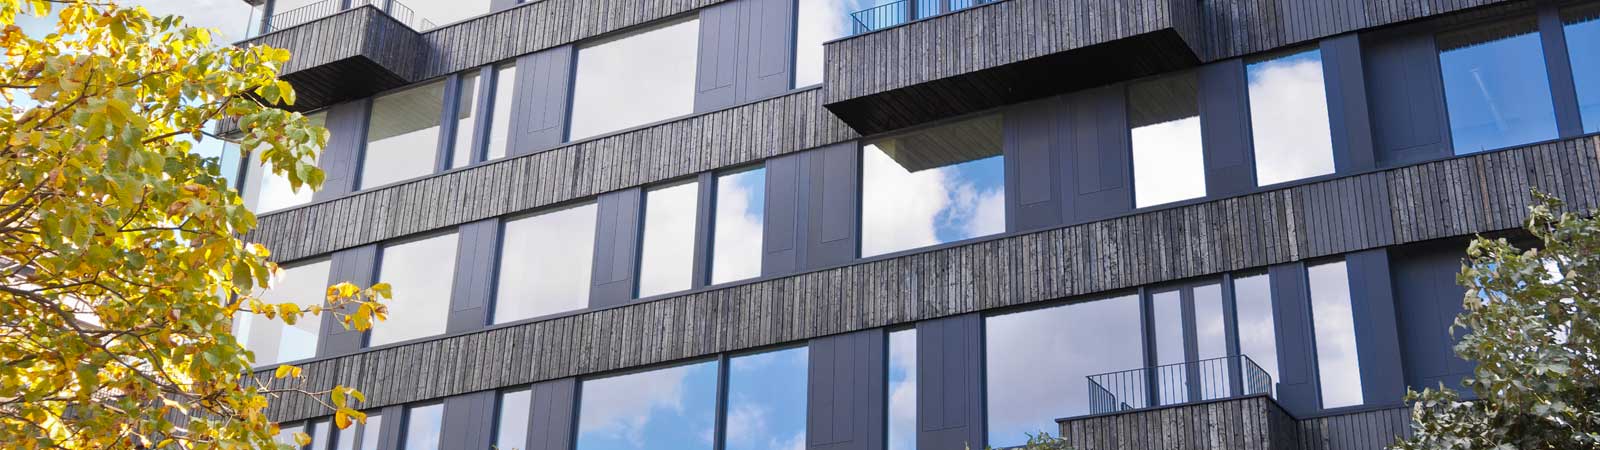 Architecture with ALANOX® stainless steel look